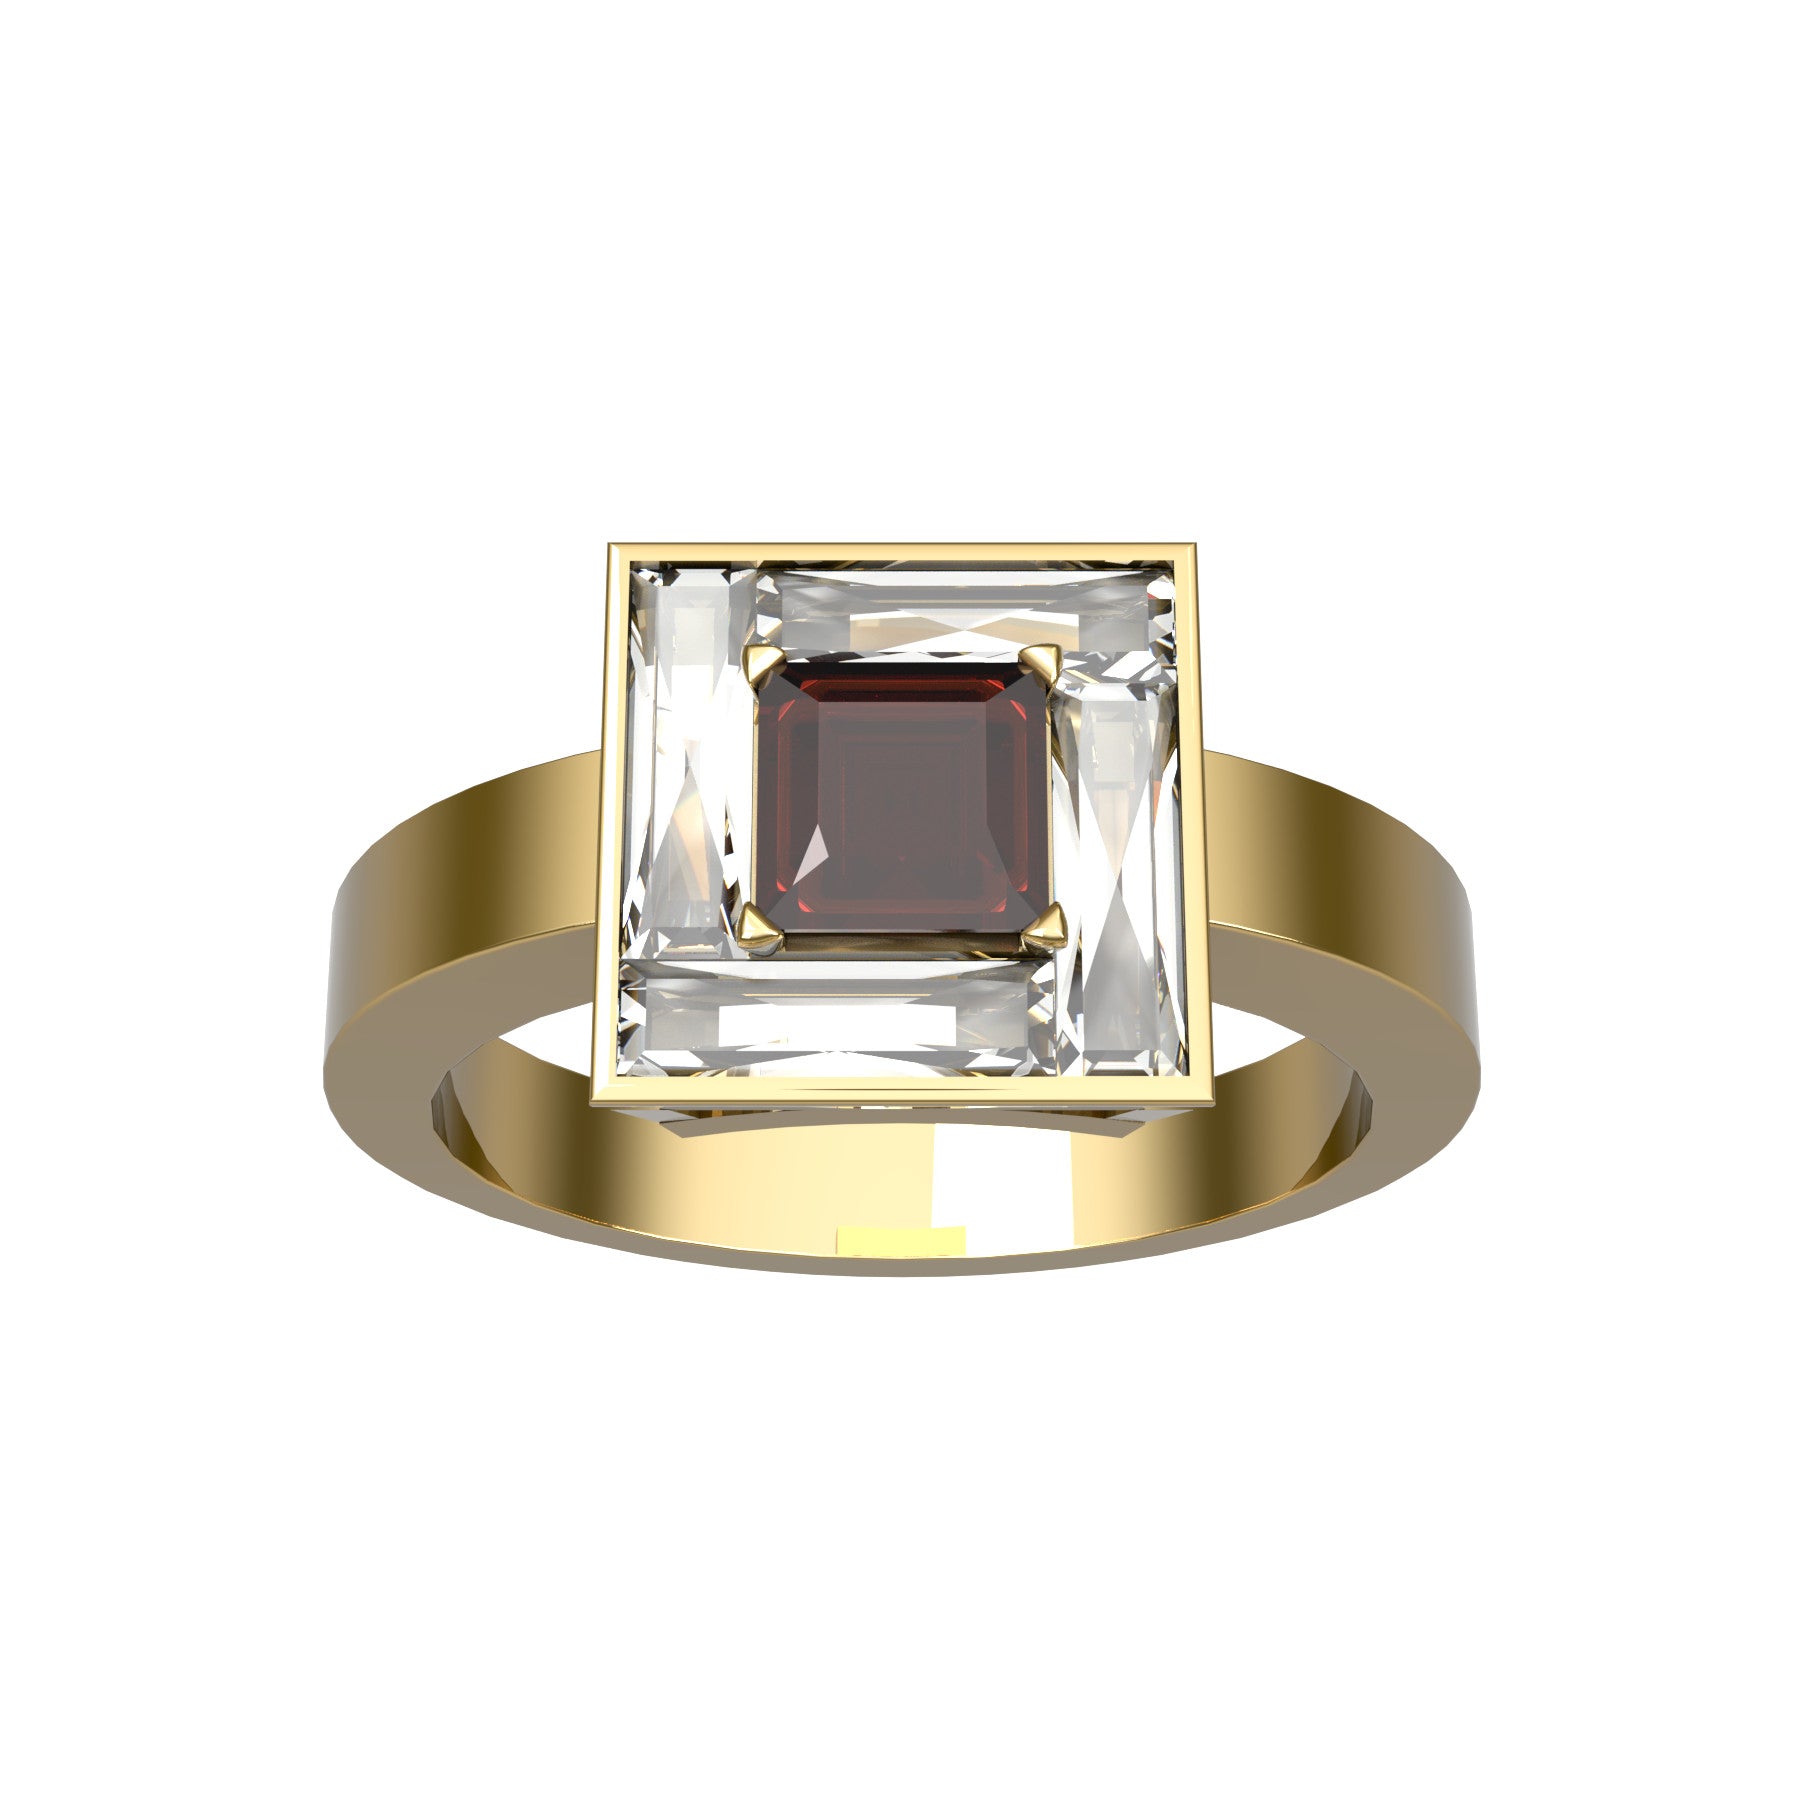 true passion ring, 18 K yellow gold, about 0,34 ct square emerald natural ruby, natural baguette diamonds, weight about 4,5 g. (0.16 oz), width 9,3 mm max